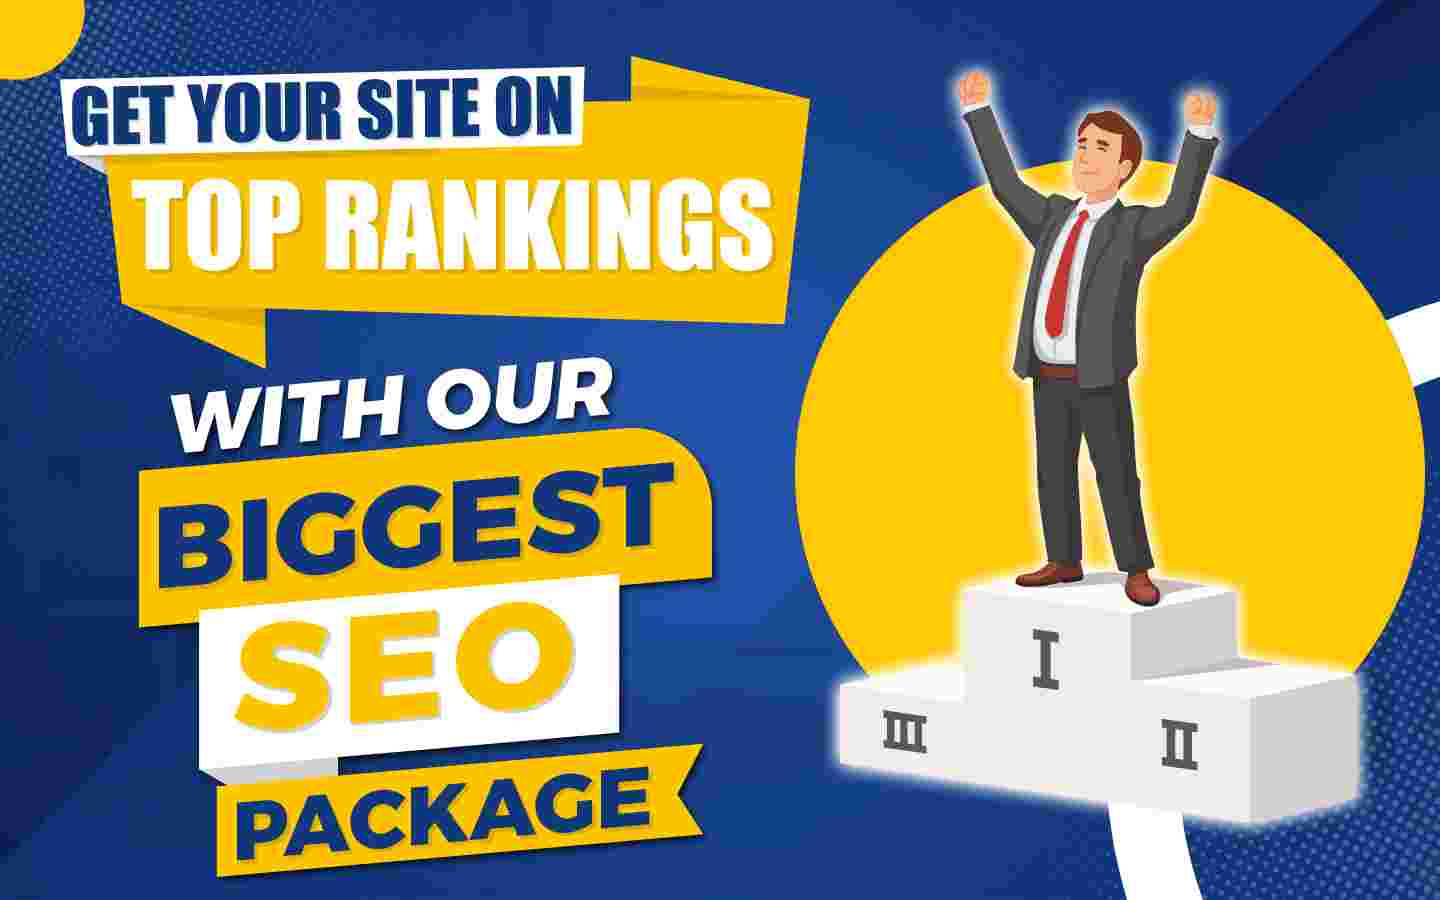 Proven Google Page 1 Results For Most Customers